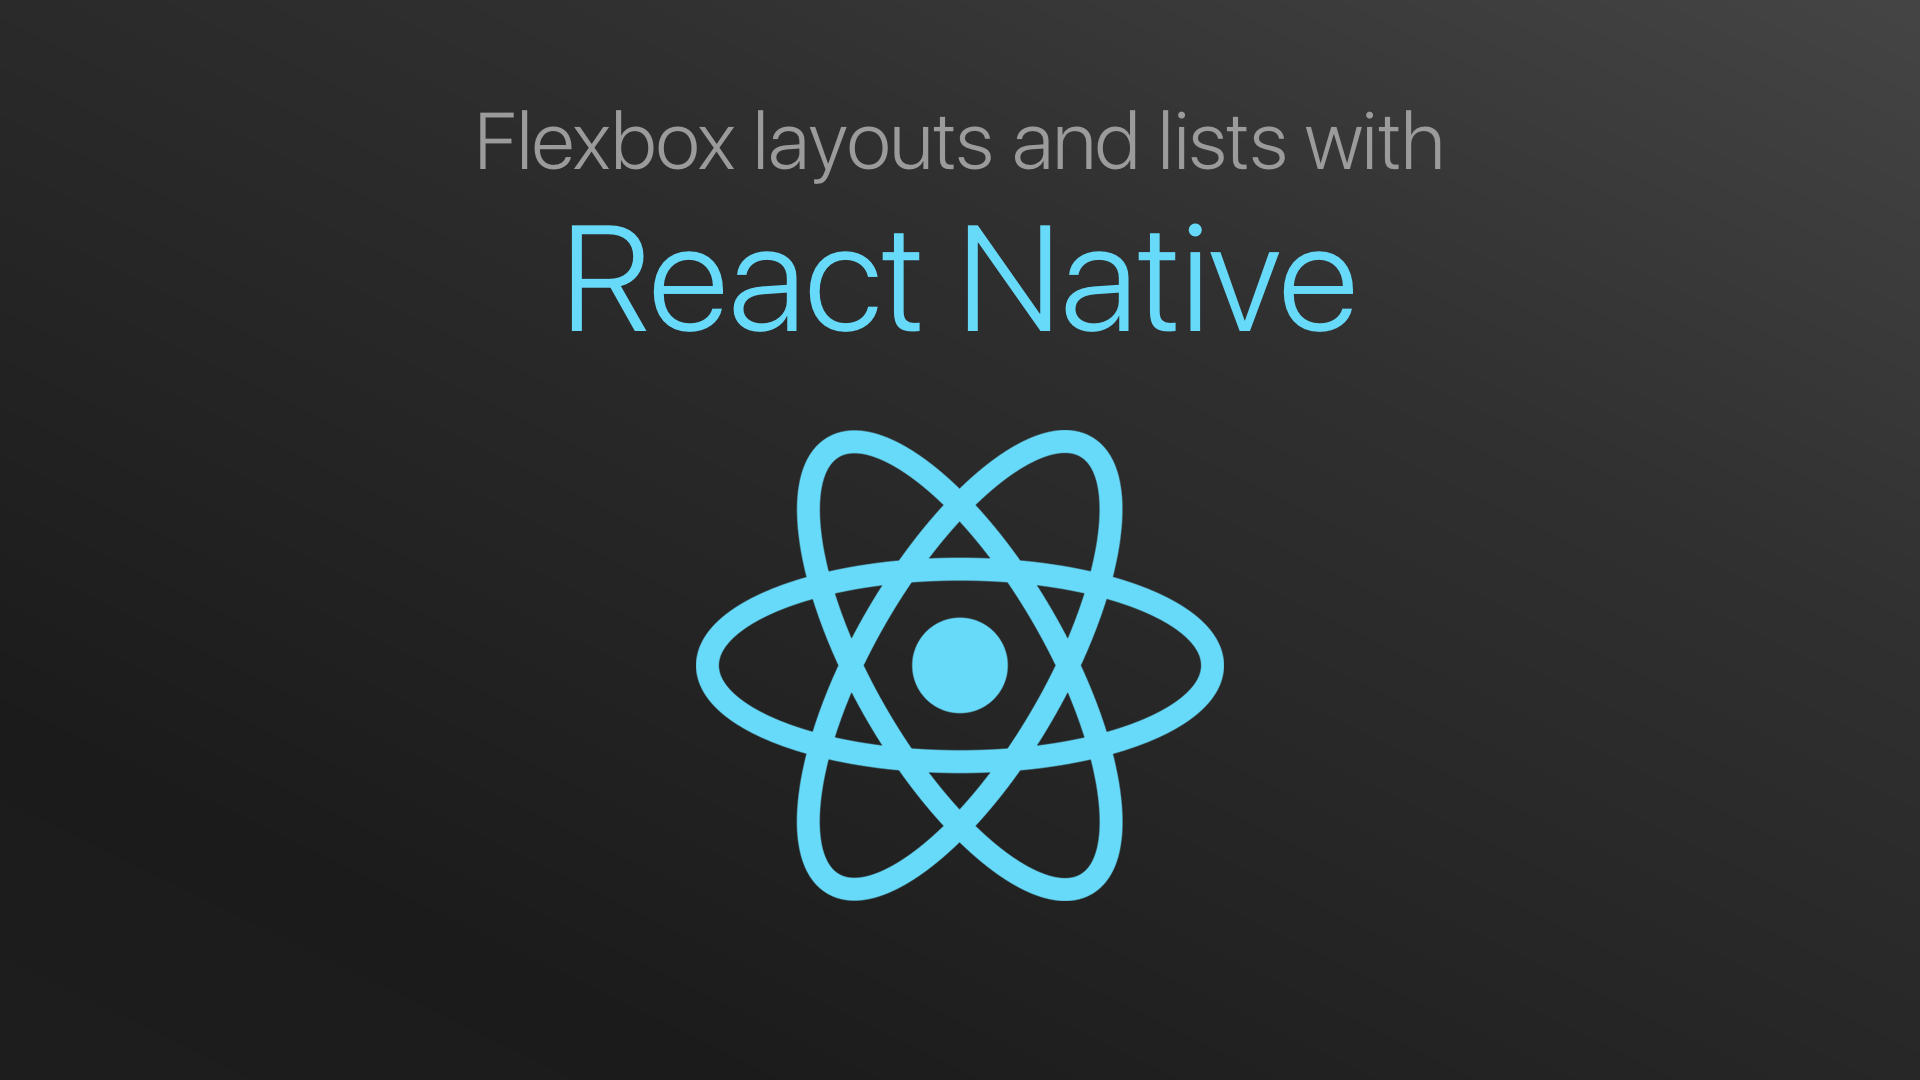 Flexbox layouts and lists with React Native